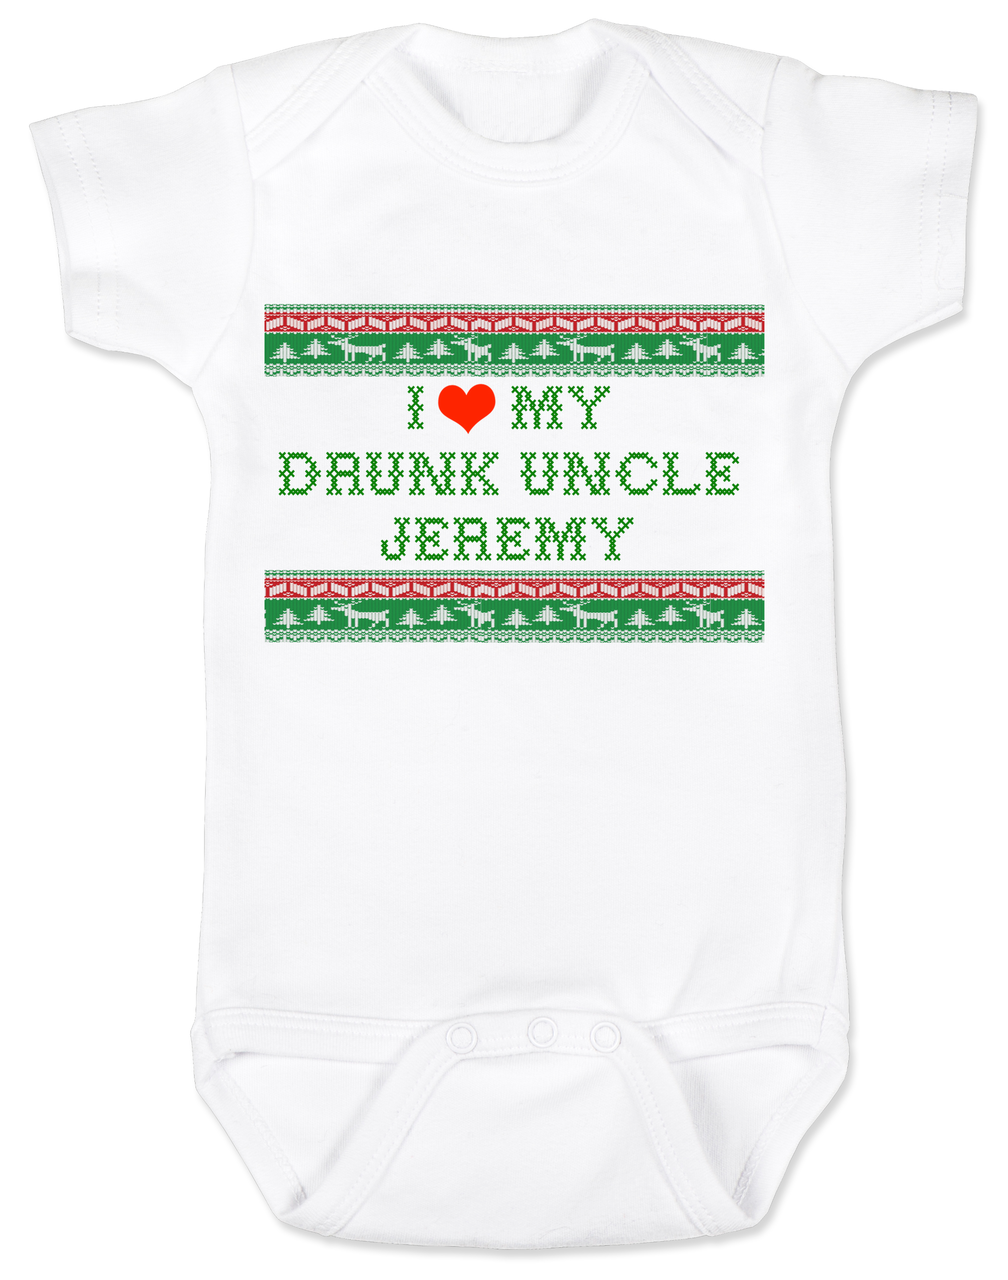 funny baby gifts from unclephoto